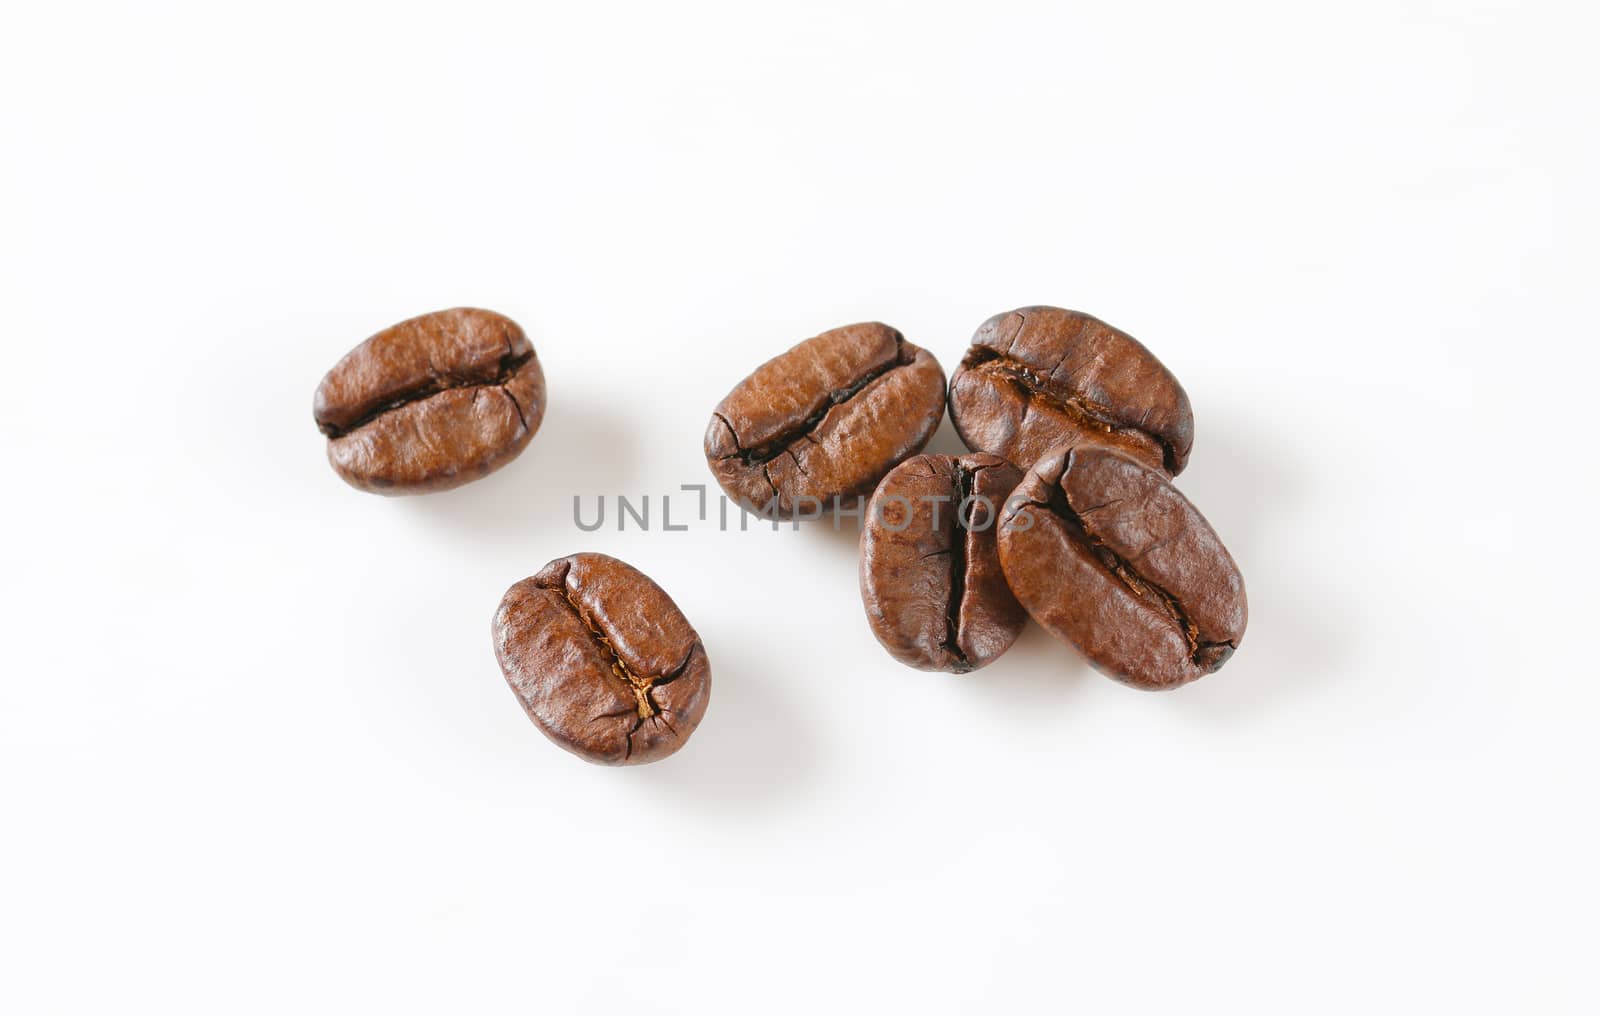 Roasted coffee beans by Digifoodstock